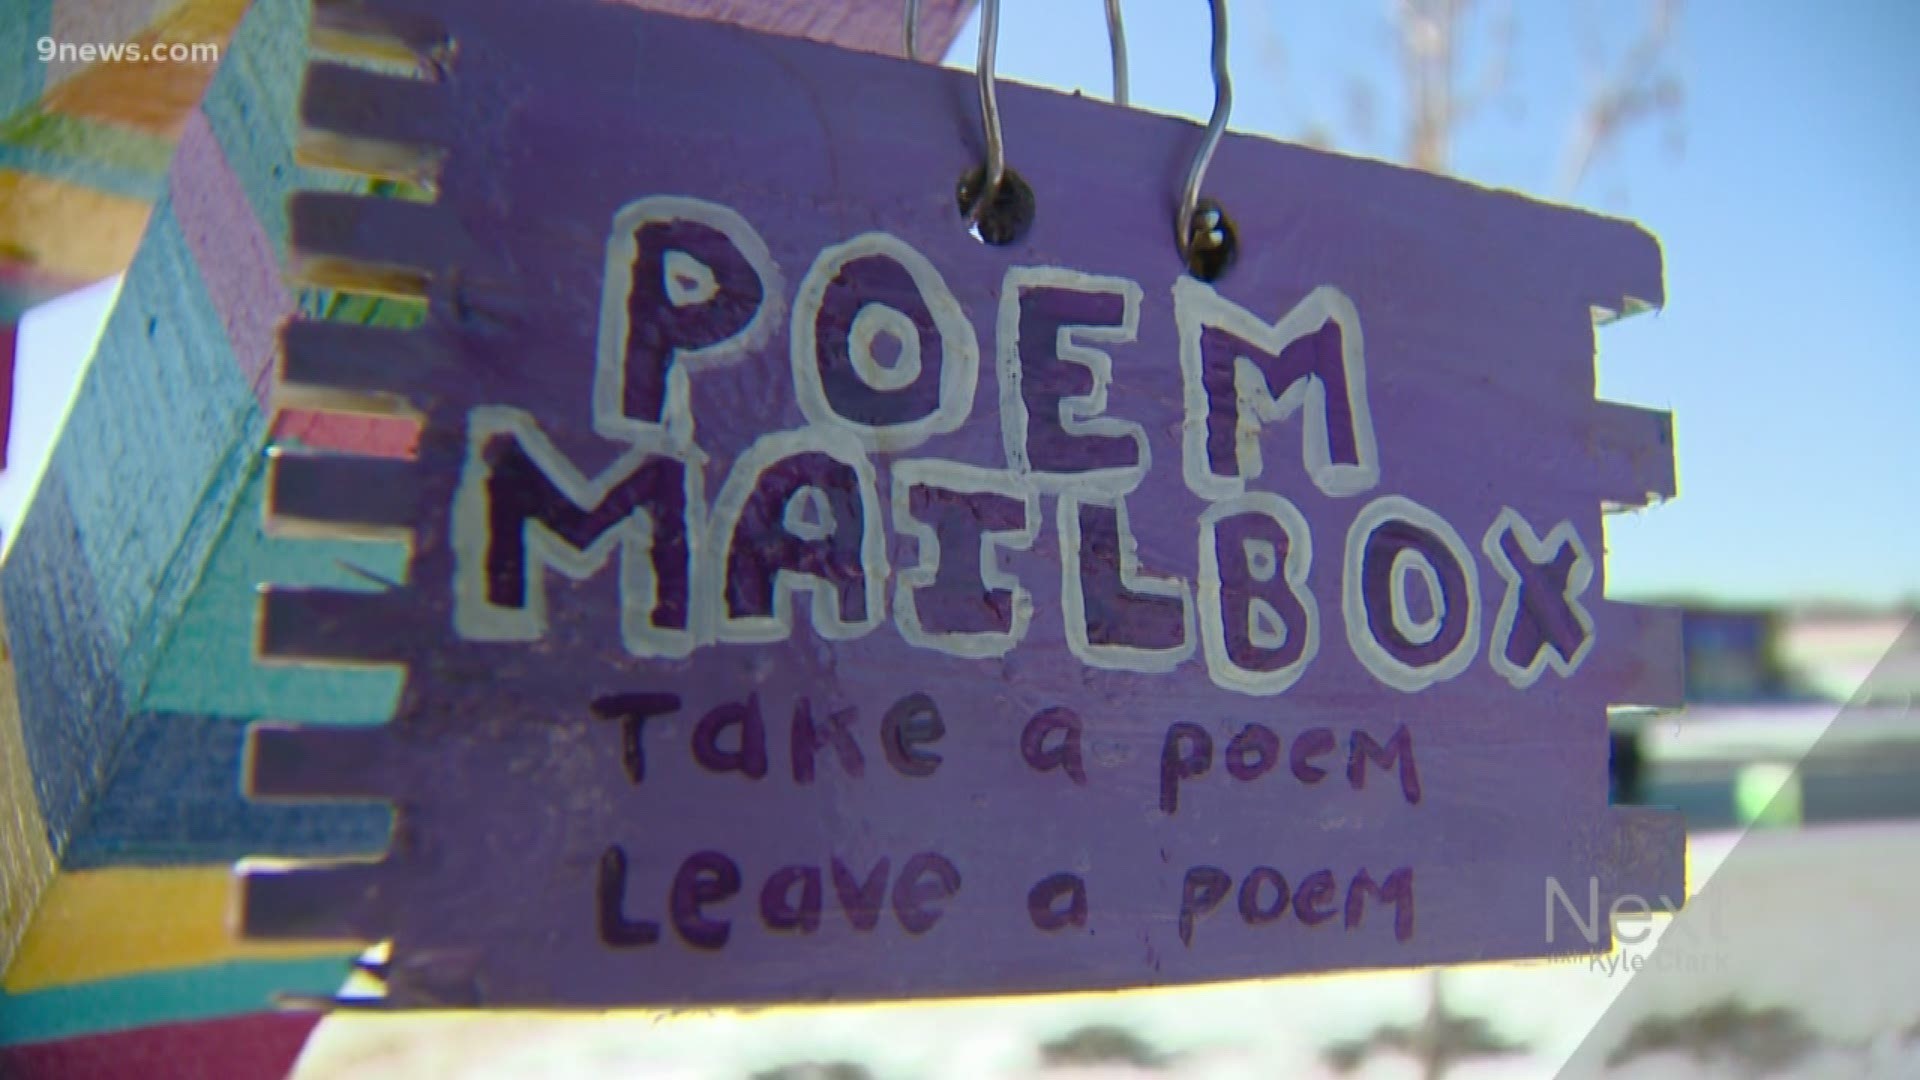 There are 6 mailboxes along West Colfax where people are encouraged to either write and leave a piece of poetry or take one home.